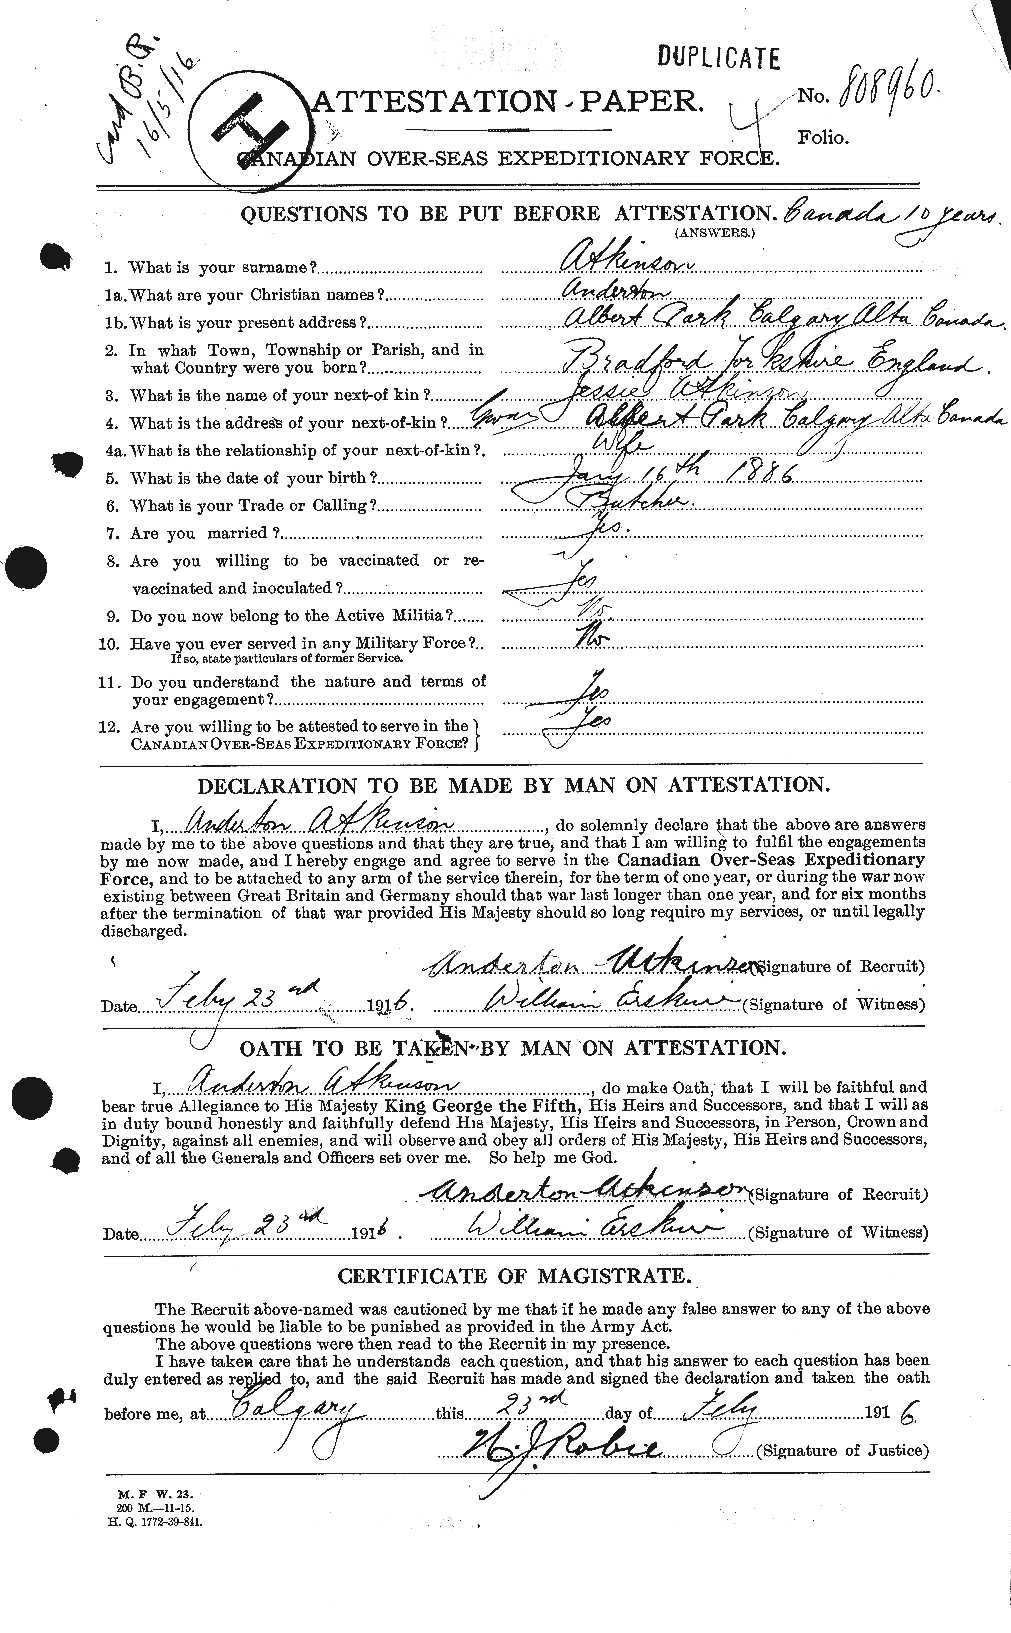 Personnel Records of the First World War - CEF 217576a